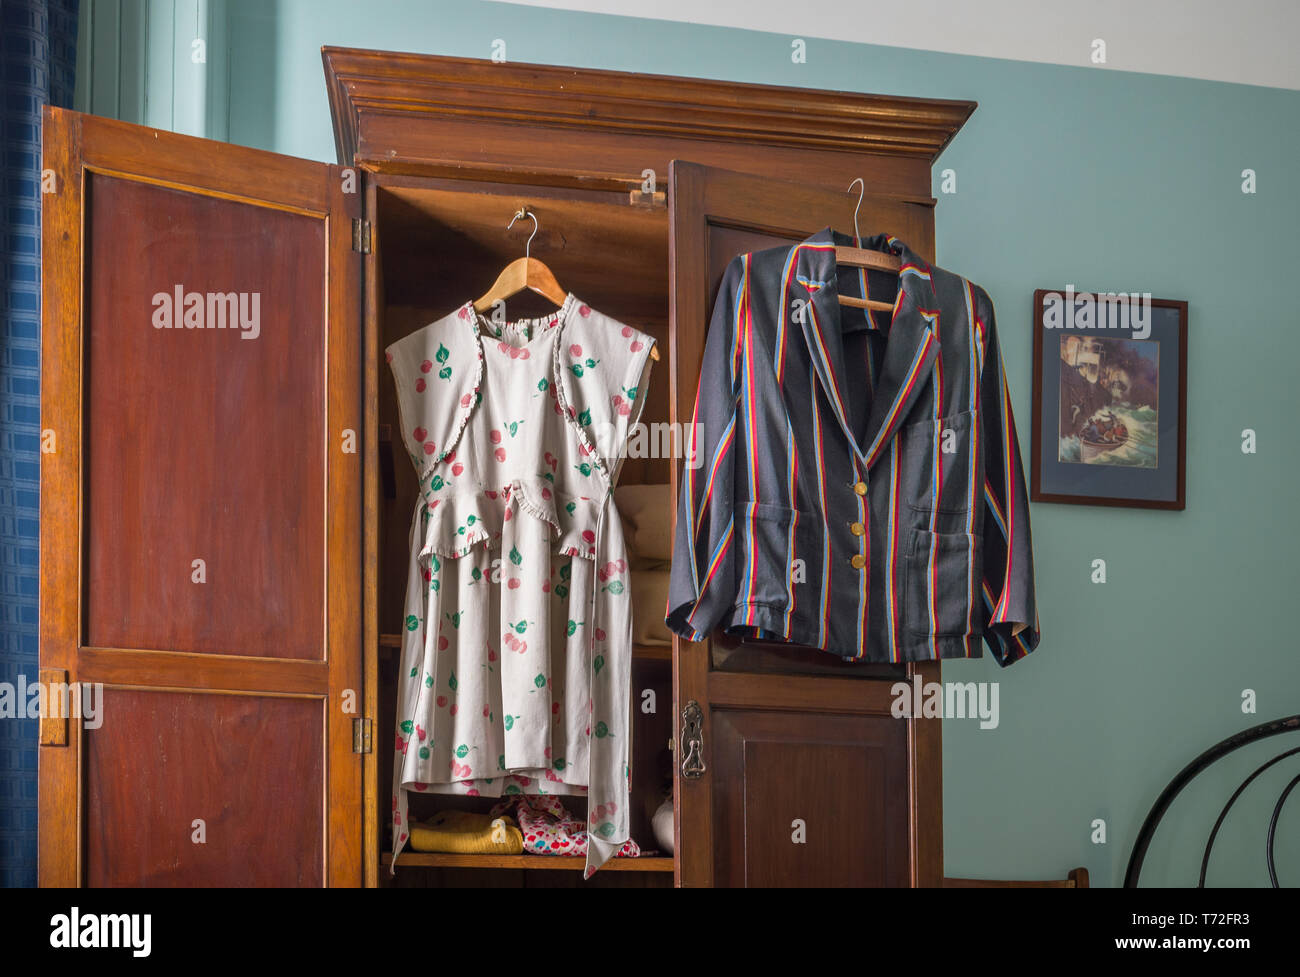 Typical bedroom from the 1940s and 1950s period with open wardrobe  displaying a jacket and dress Stock Photo - Alamy